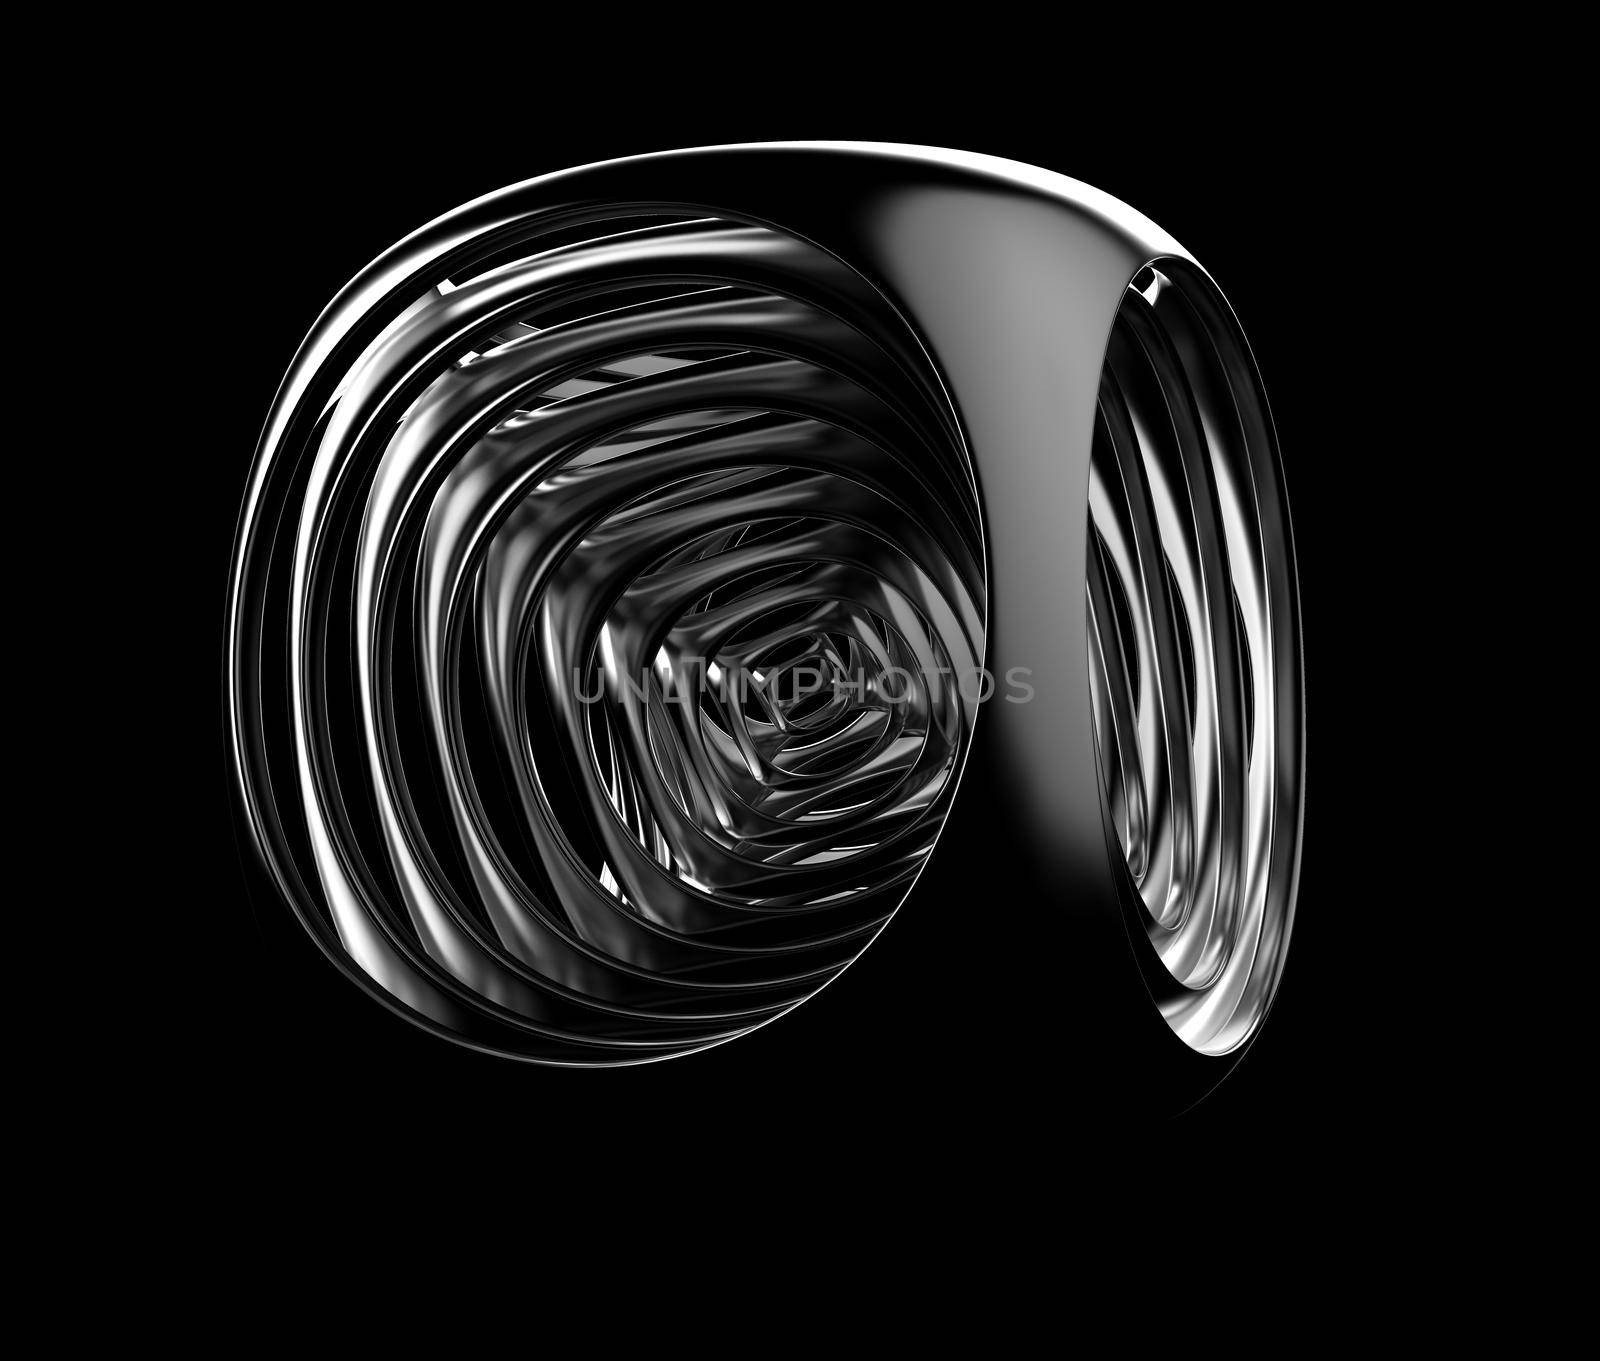 Black and white cubic abstraction. Repeating silver fillet cubes scaling down in size. Digital art, 3D rendering illustration